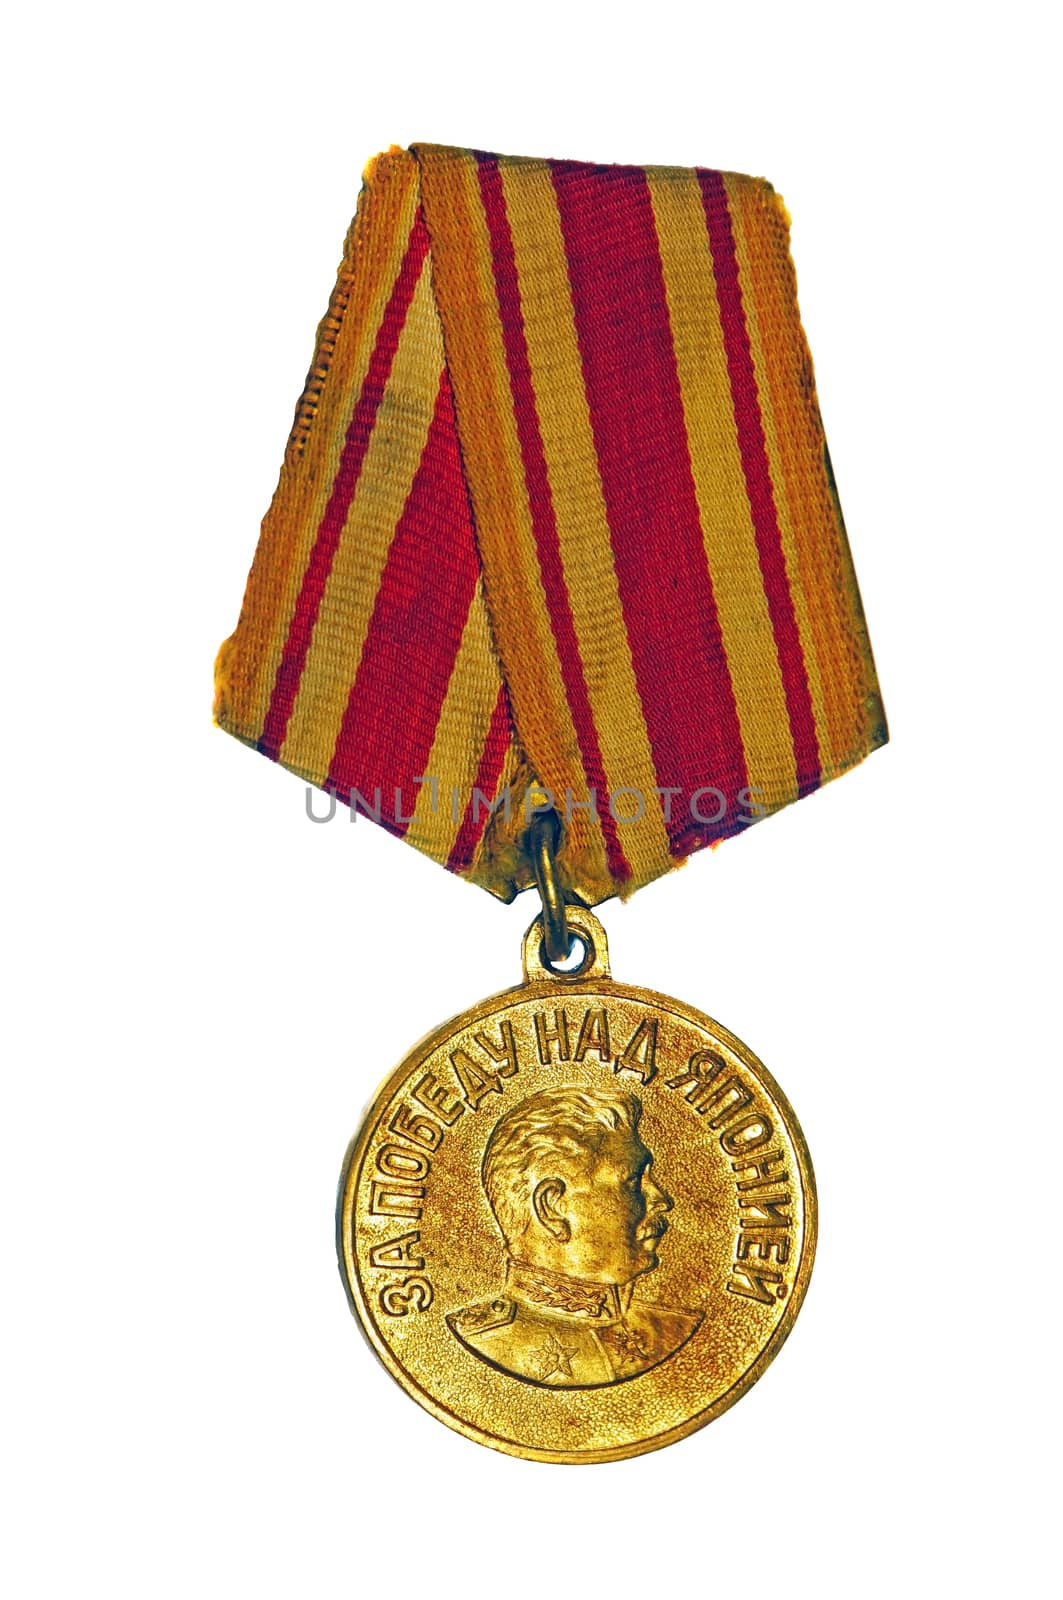 Medal "For the Victory over Japan" on a white background